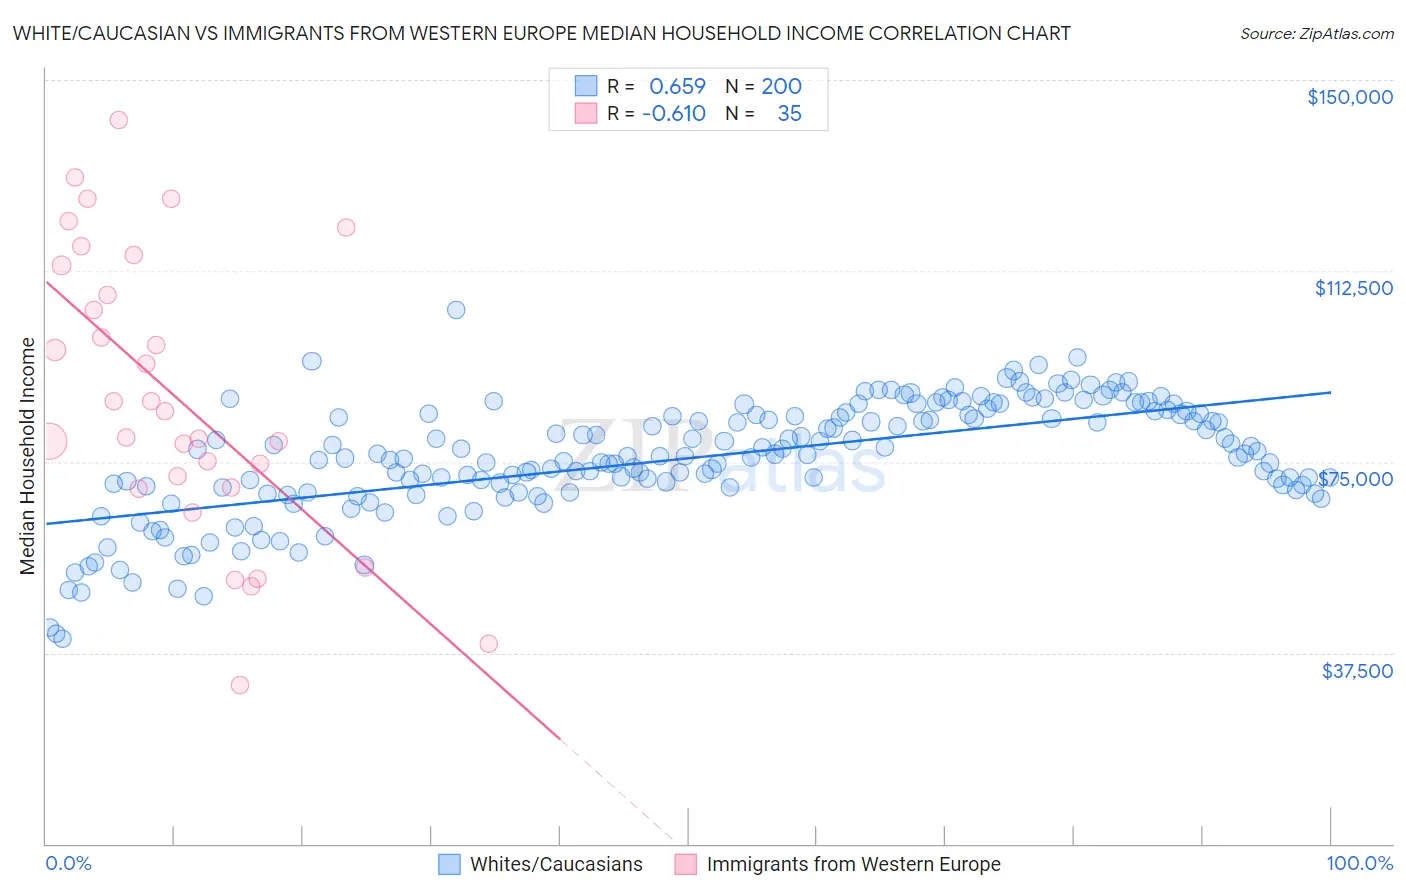 White/Caucasian vs Immigrants from Western Europe Median Household Income